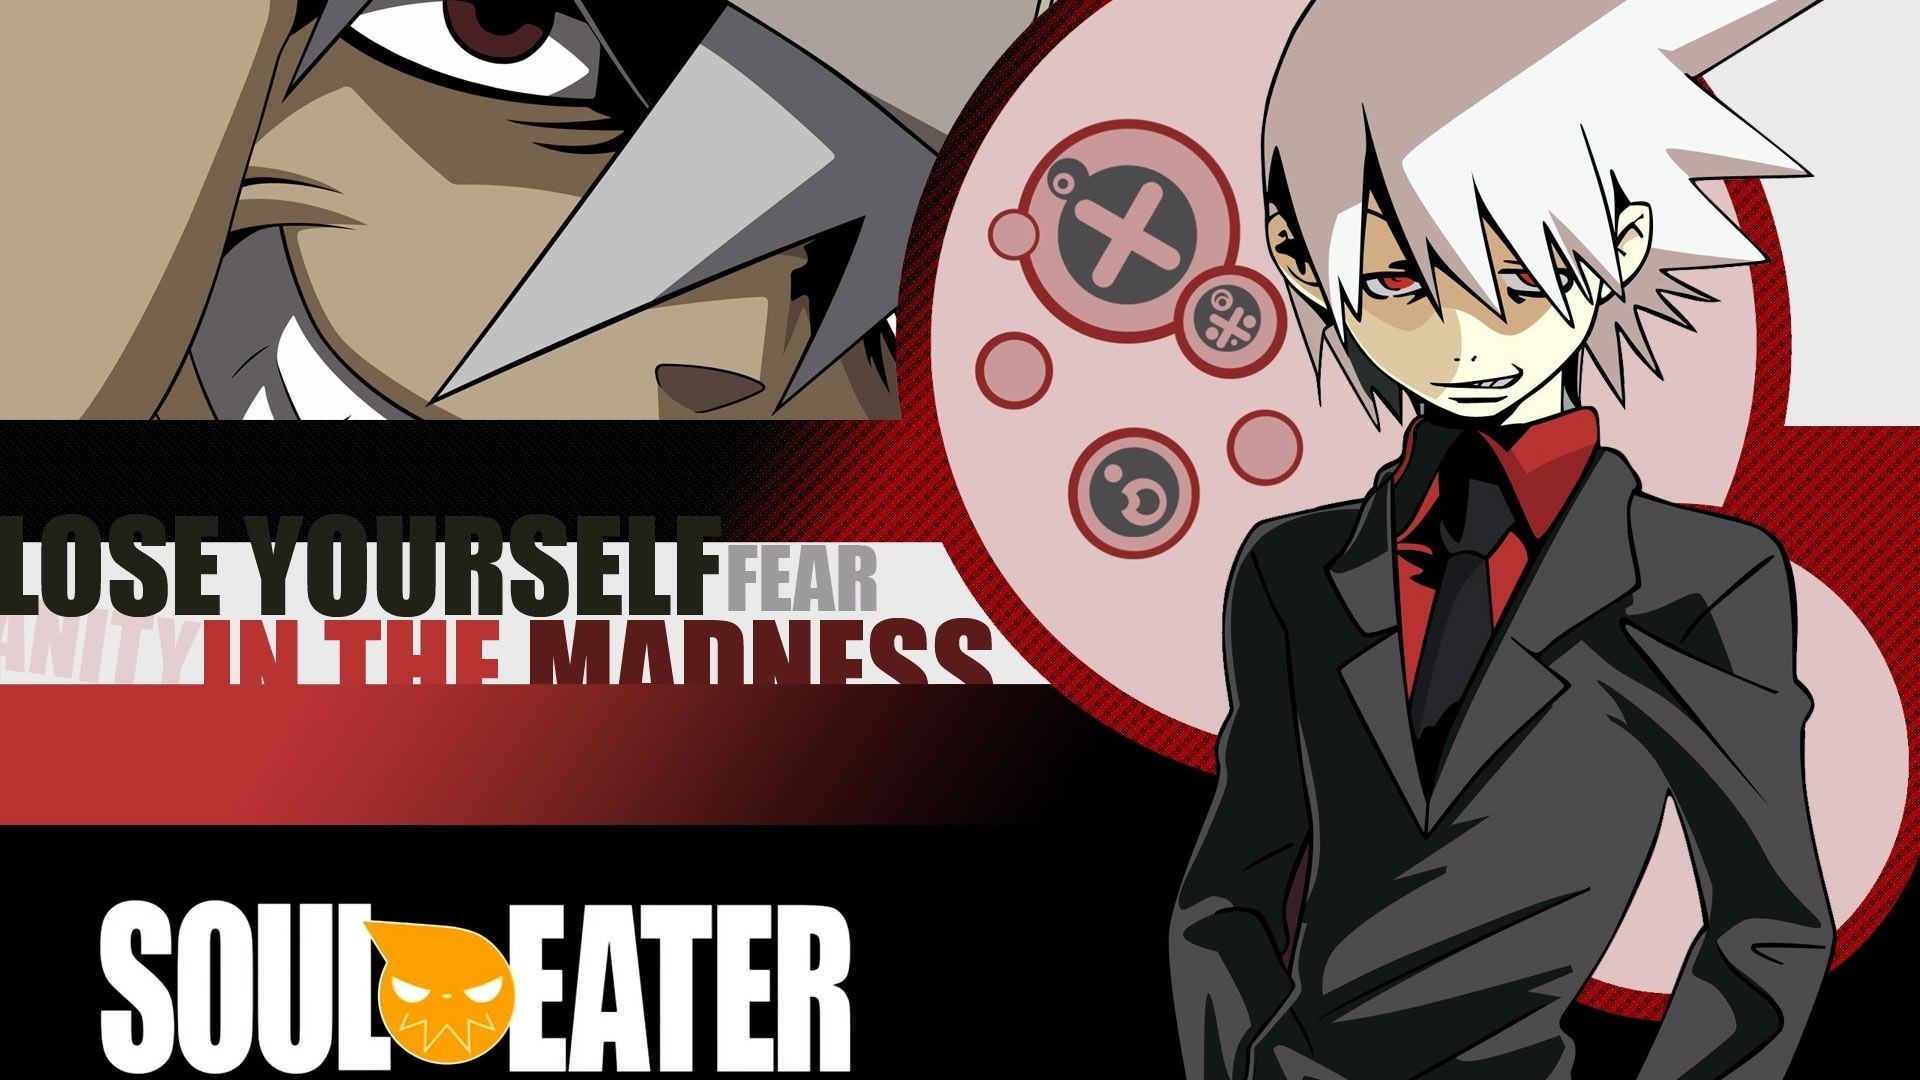 1920x1080 Cool Soul eater wallpapers hd